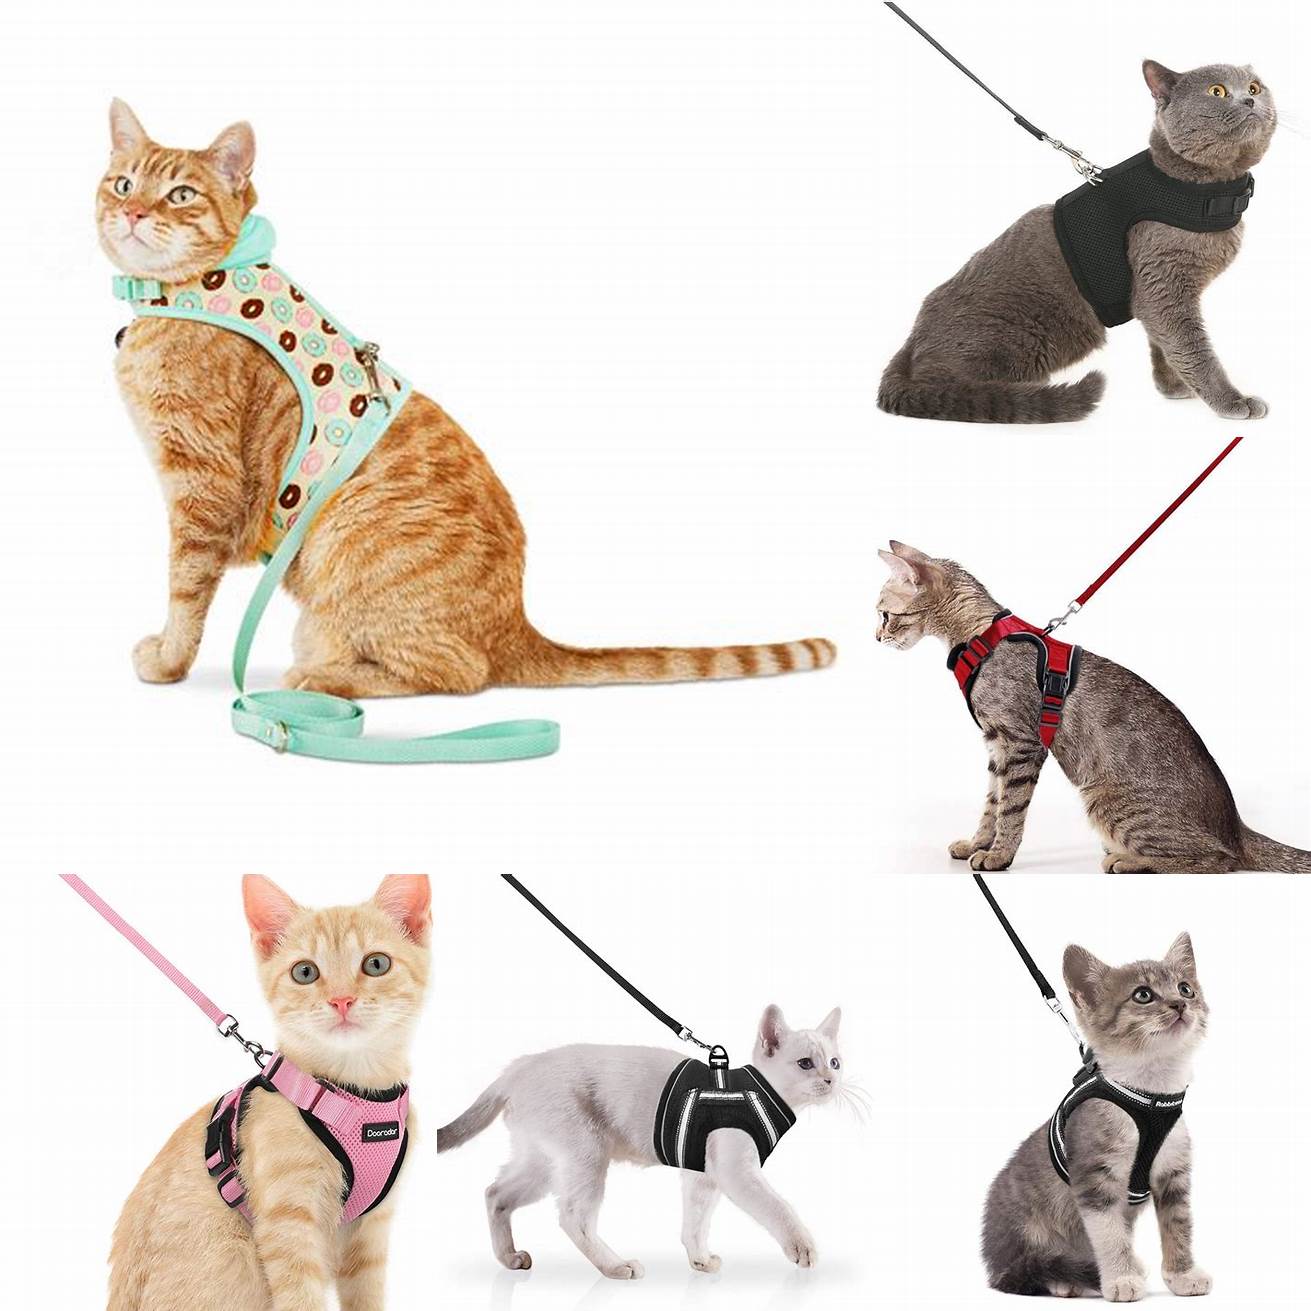 Use cat harnesses and leashes